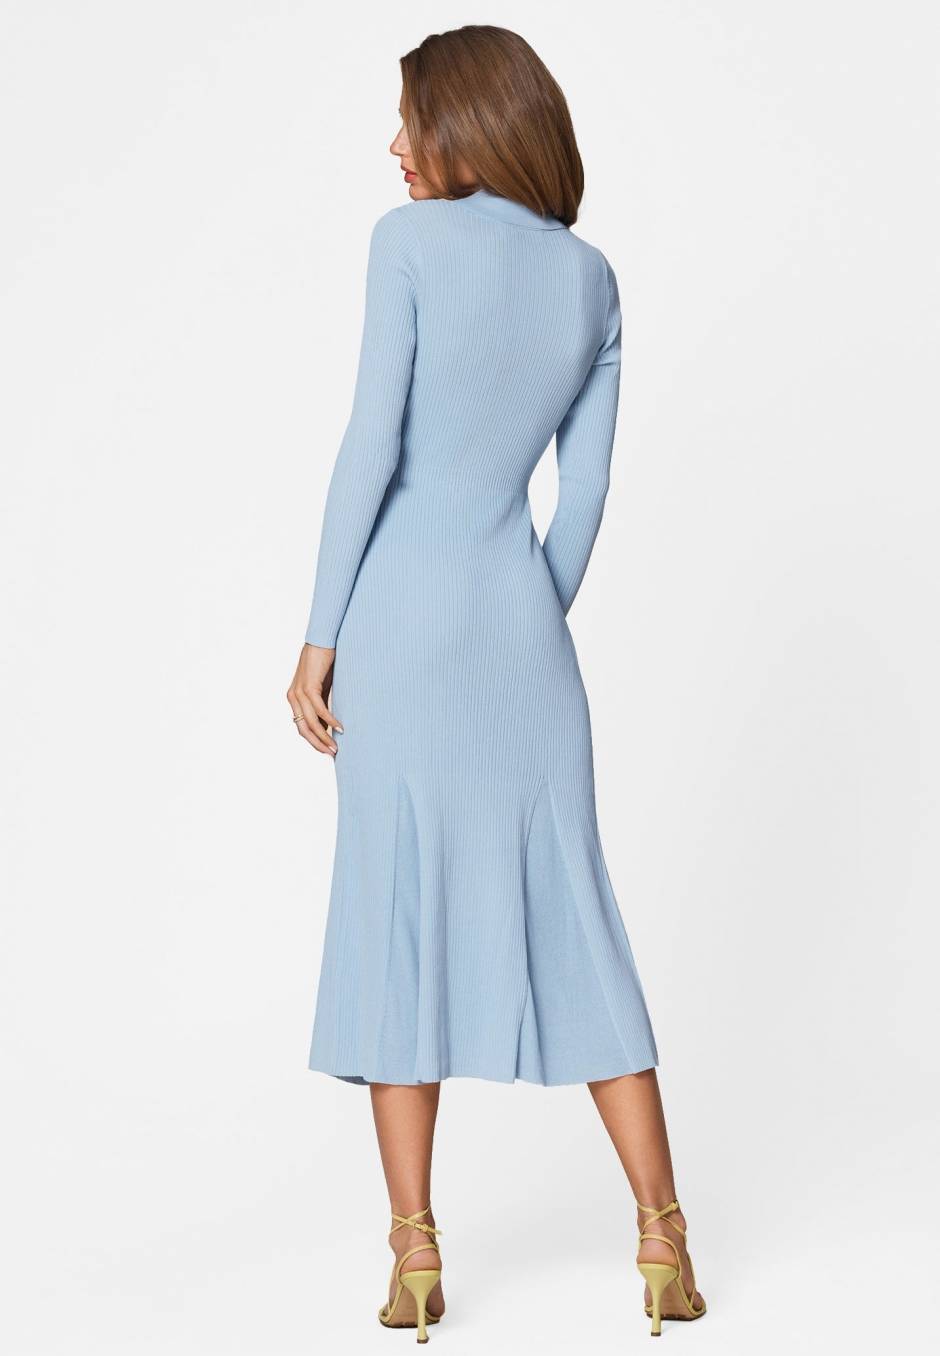 Adoore Knitted Riviera Dress Blue